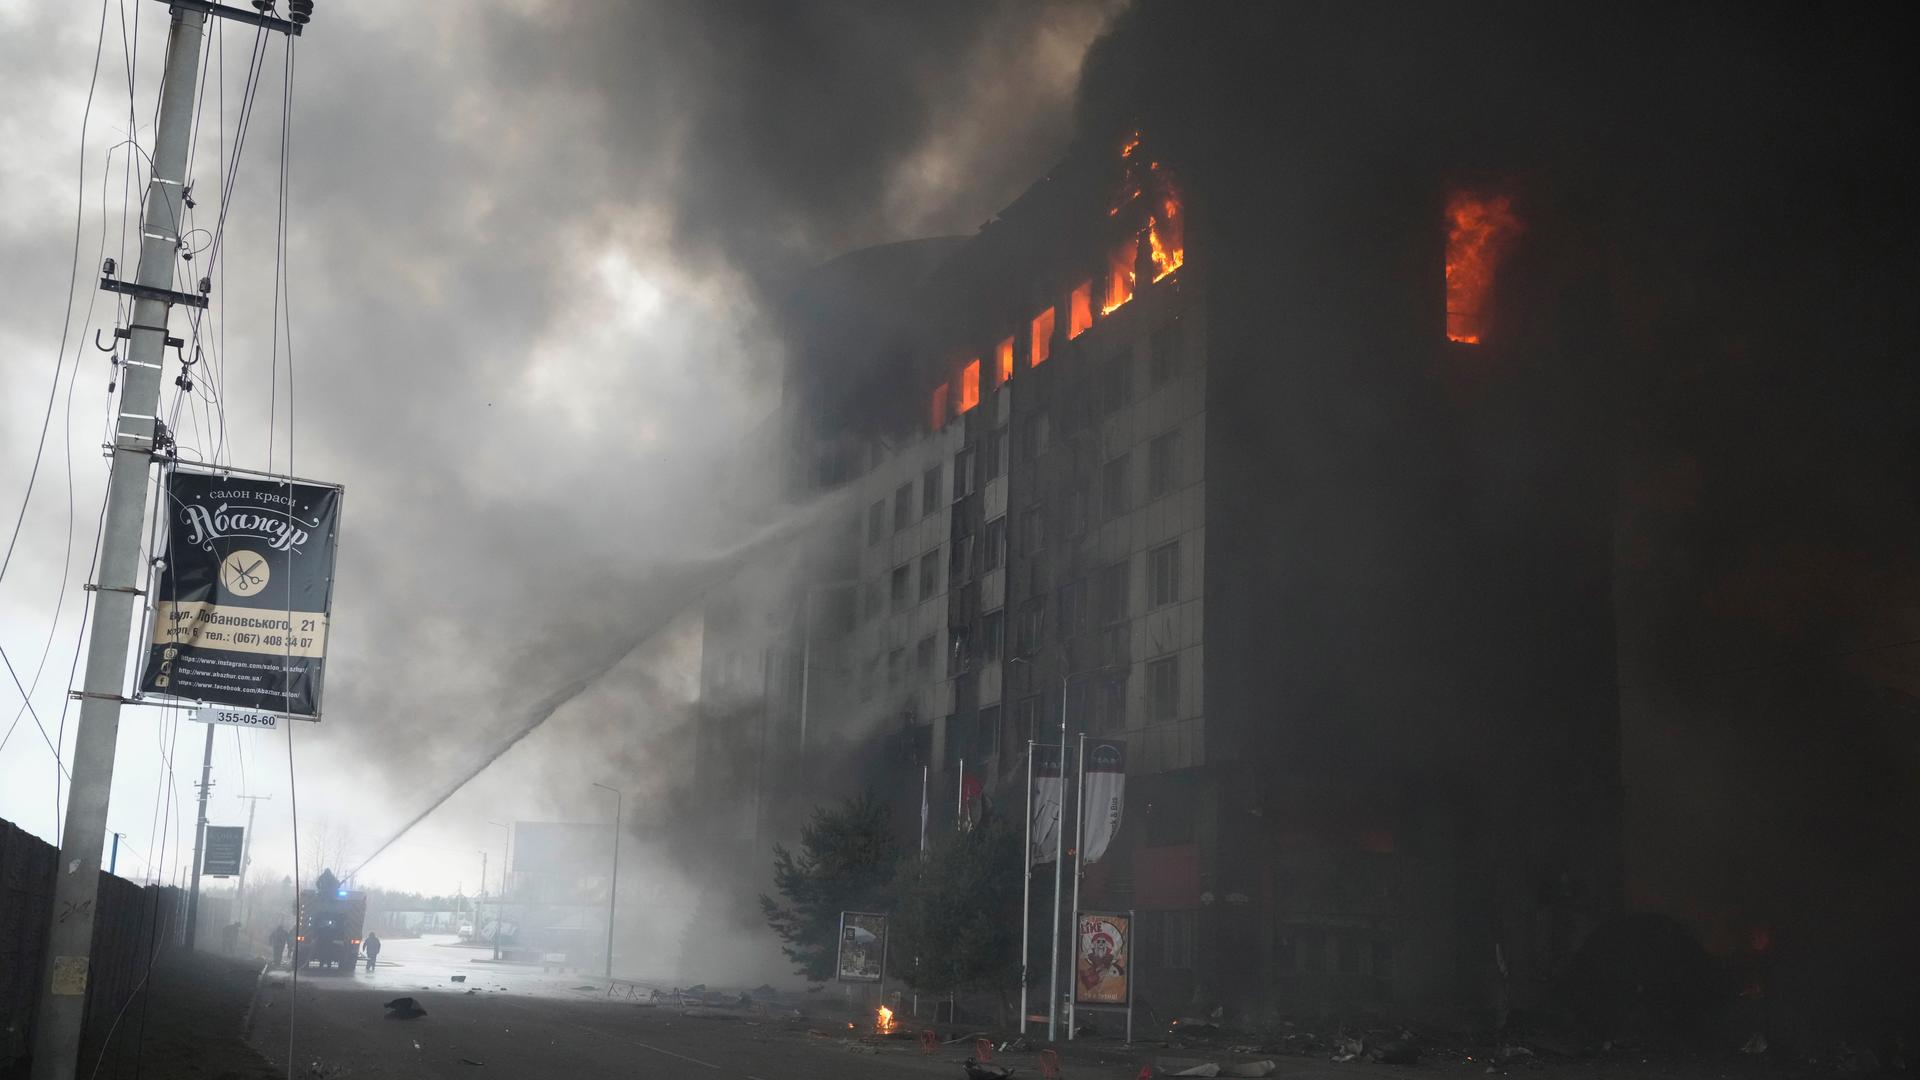 Firefighters hose down a burning building after bombing in Kyiv, Ukraine, March 3, 2022. Russian forces have seized a strategic Ukrainian seaport and besieged another. Those moves are part of efforts to cut the country off from its coastline even as Mosco